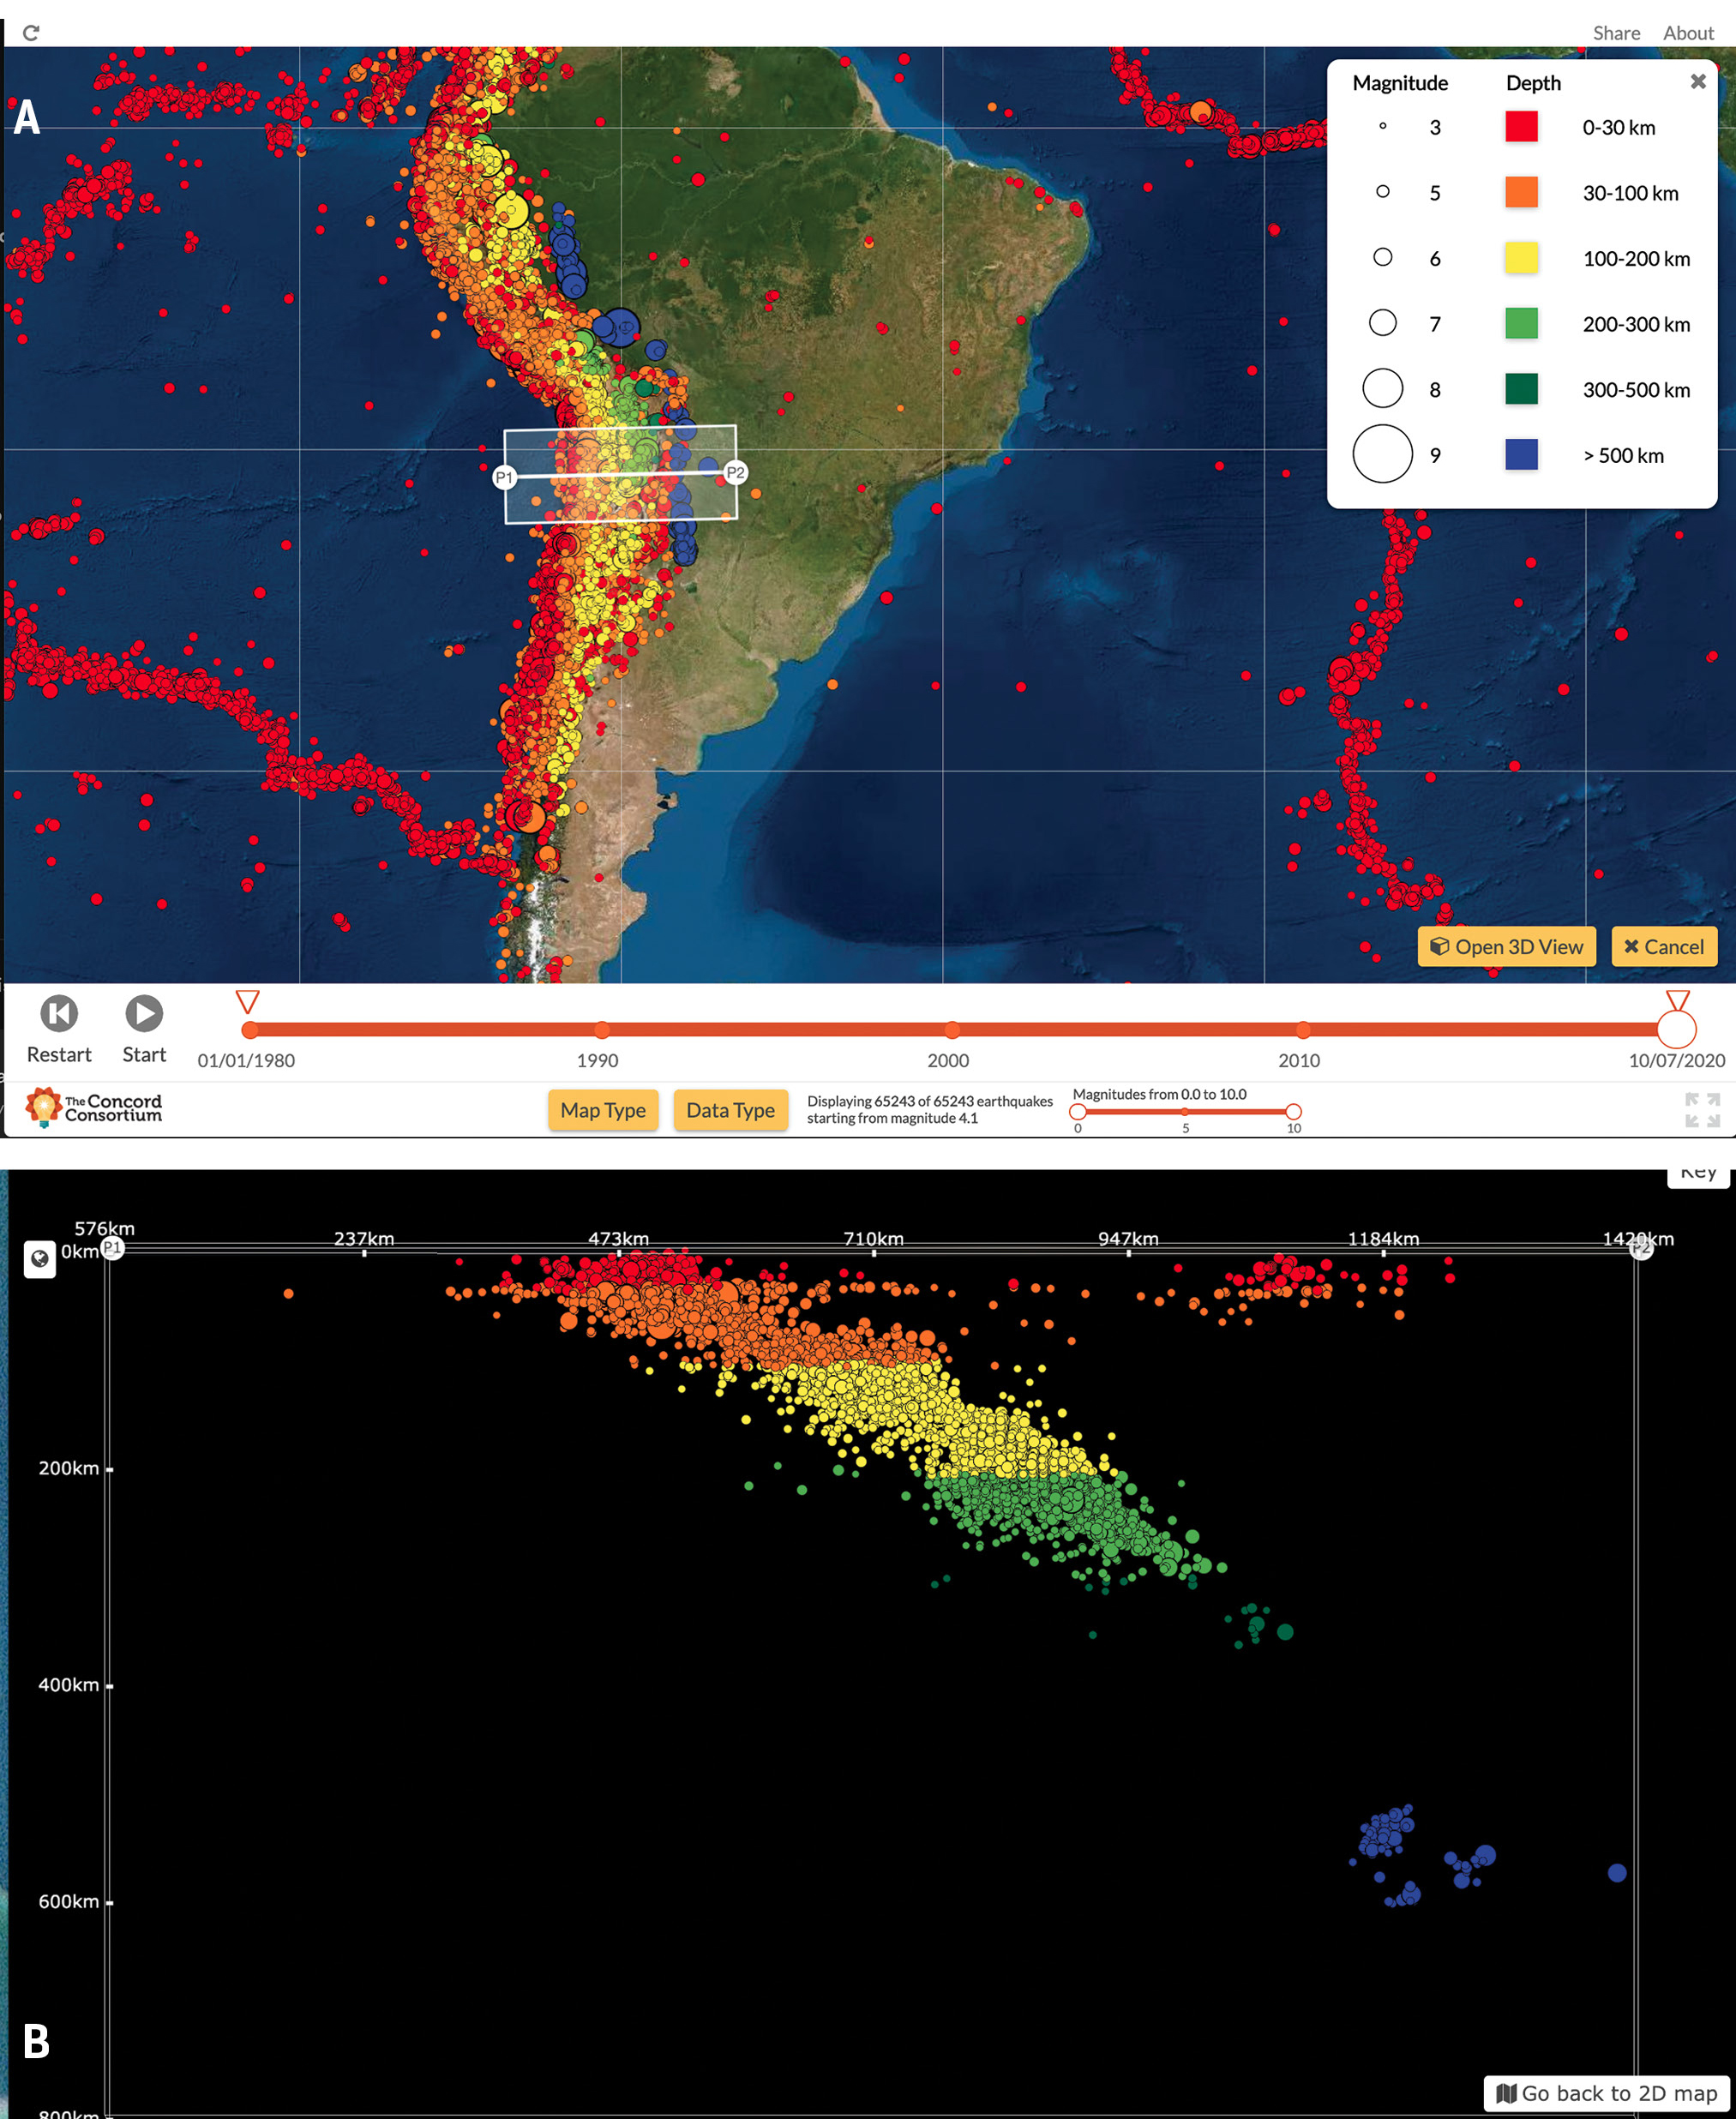 Figure 2 (A) earthquake pattern shown along the West Coast of South America; (B) cross-section showing the depth pattern of the earthquakes along the transect highlighted in 2A.